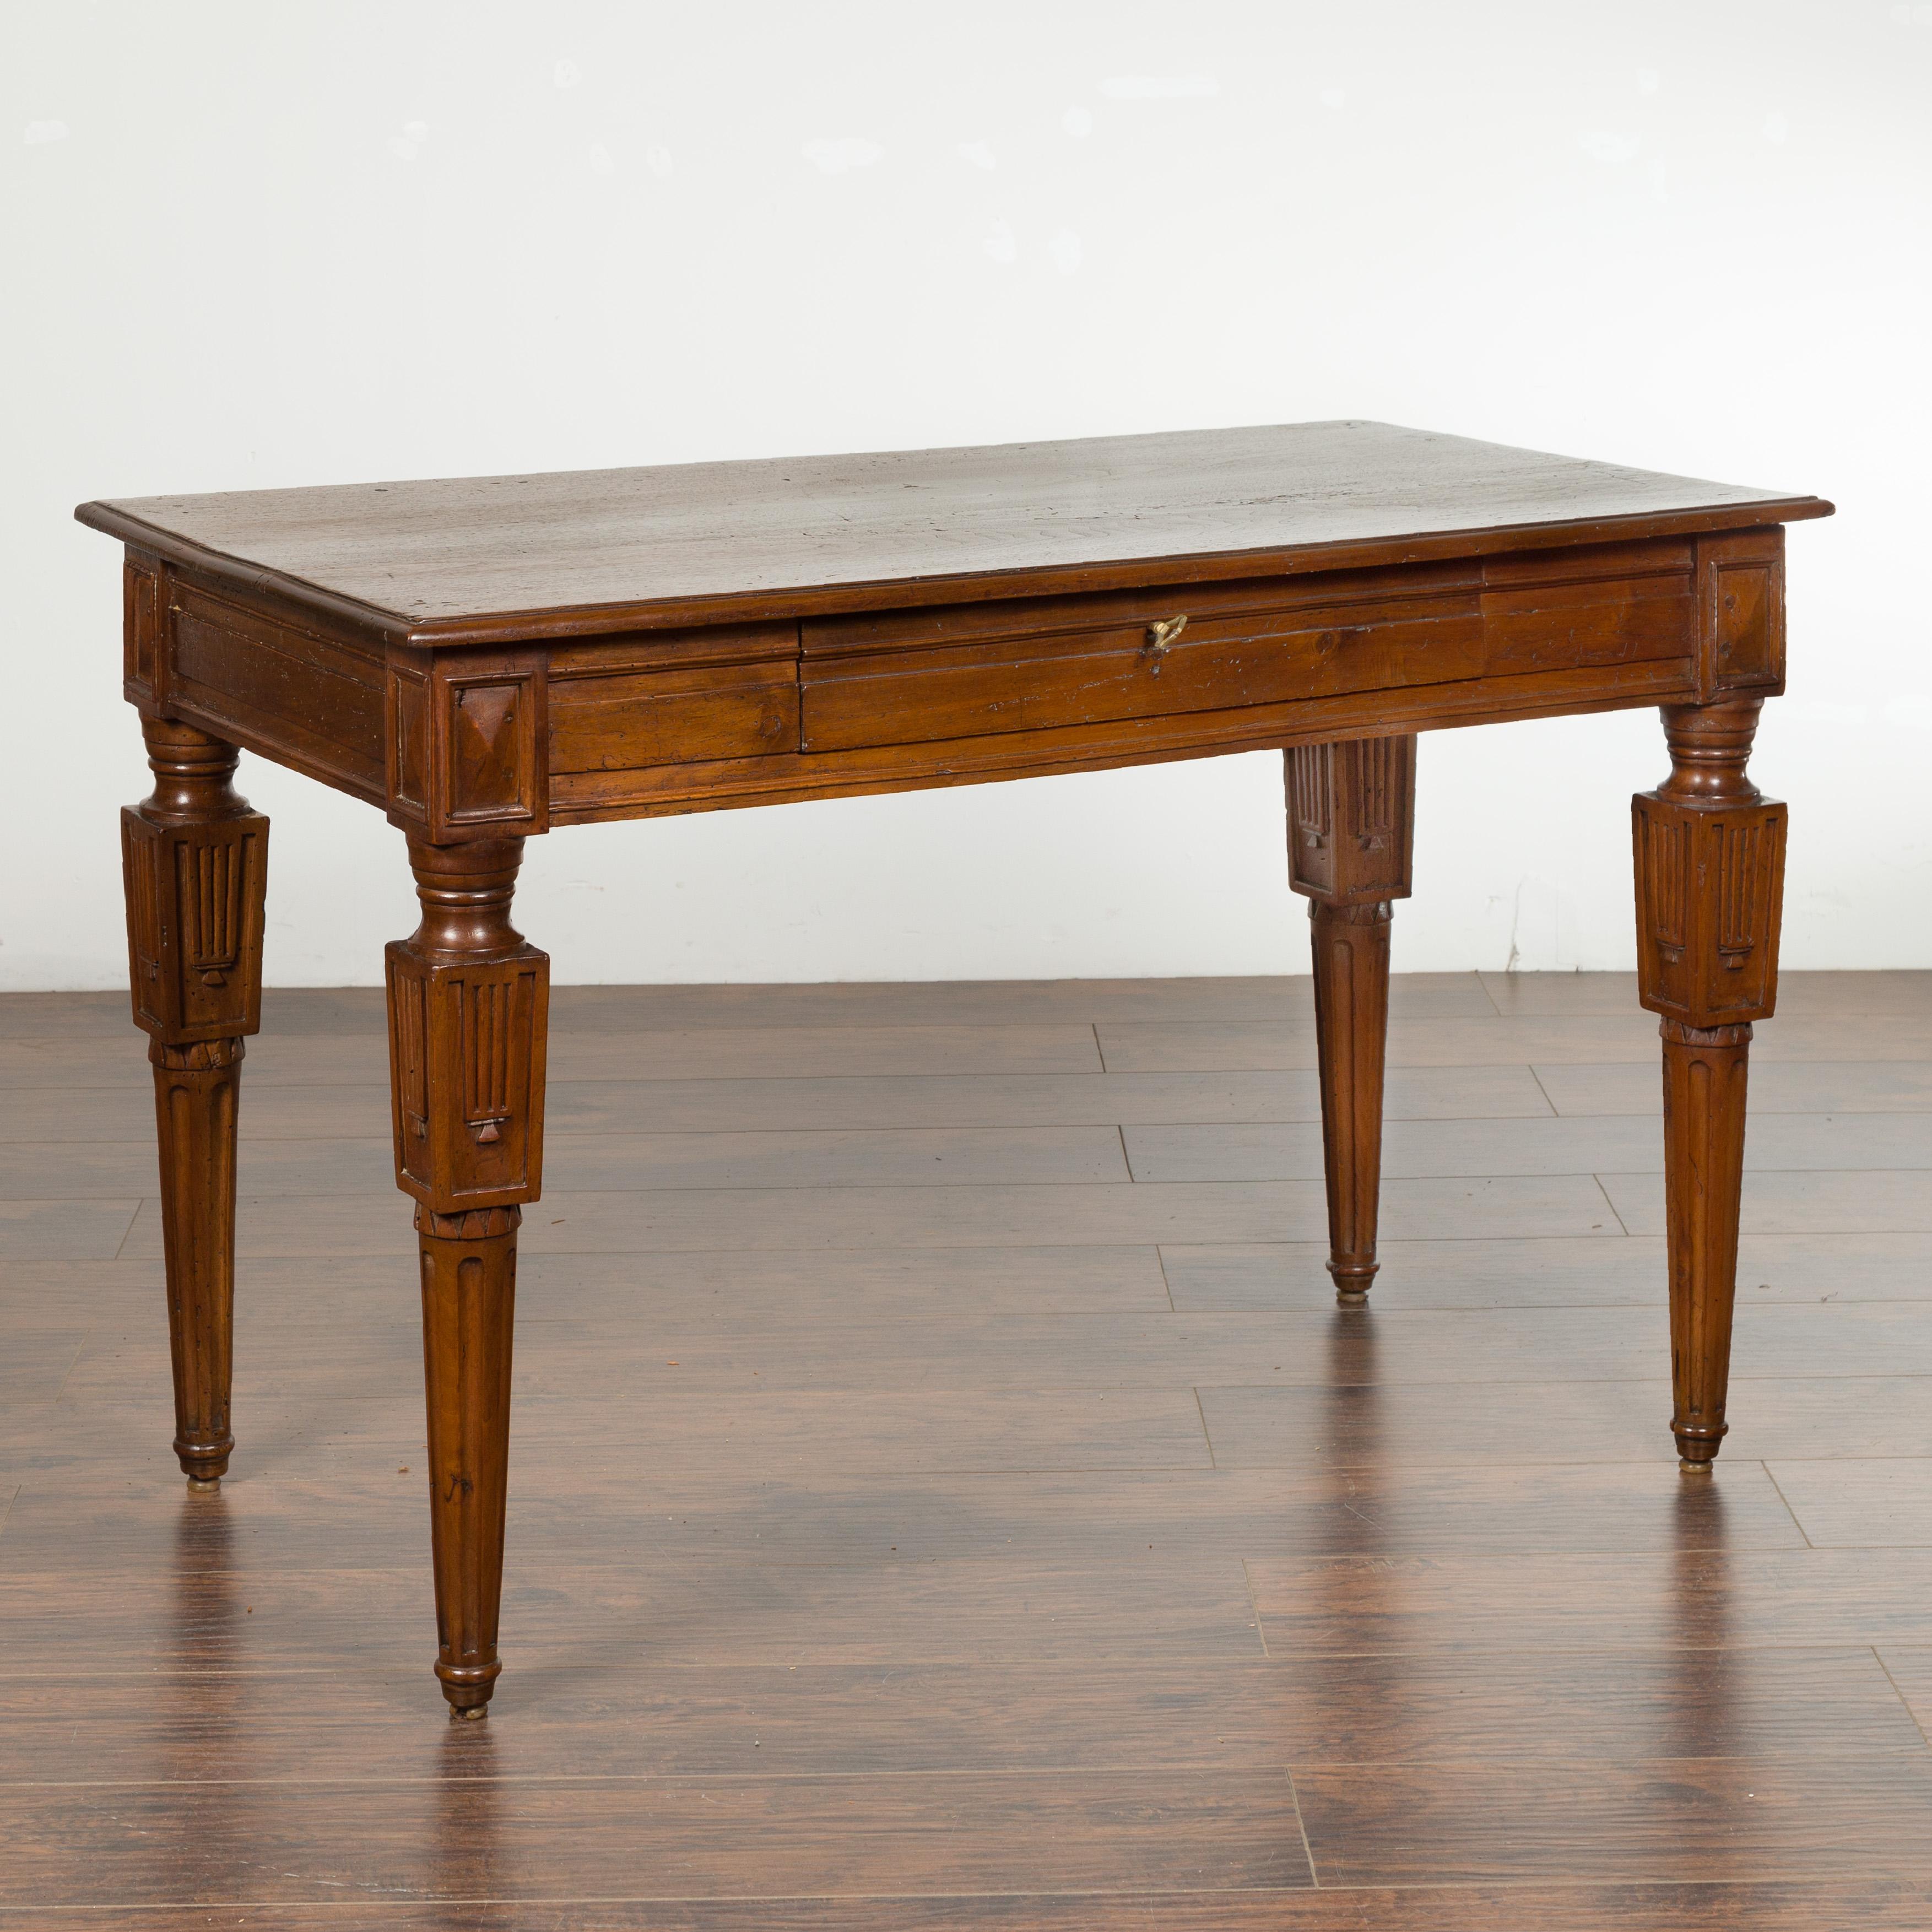 Italian 1800s Walnut Side Table with Carved Fluted Legs and Single Drawer In Good Condition For Sale In Atlanta, GA